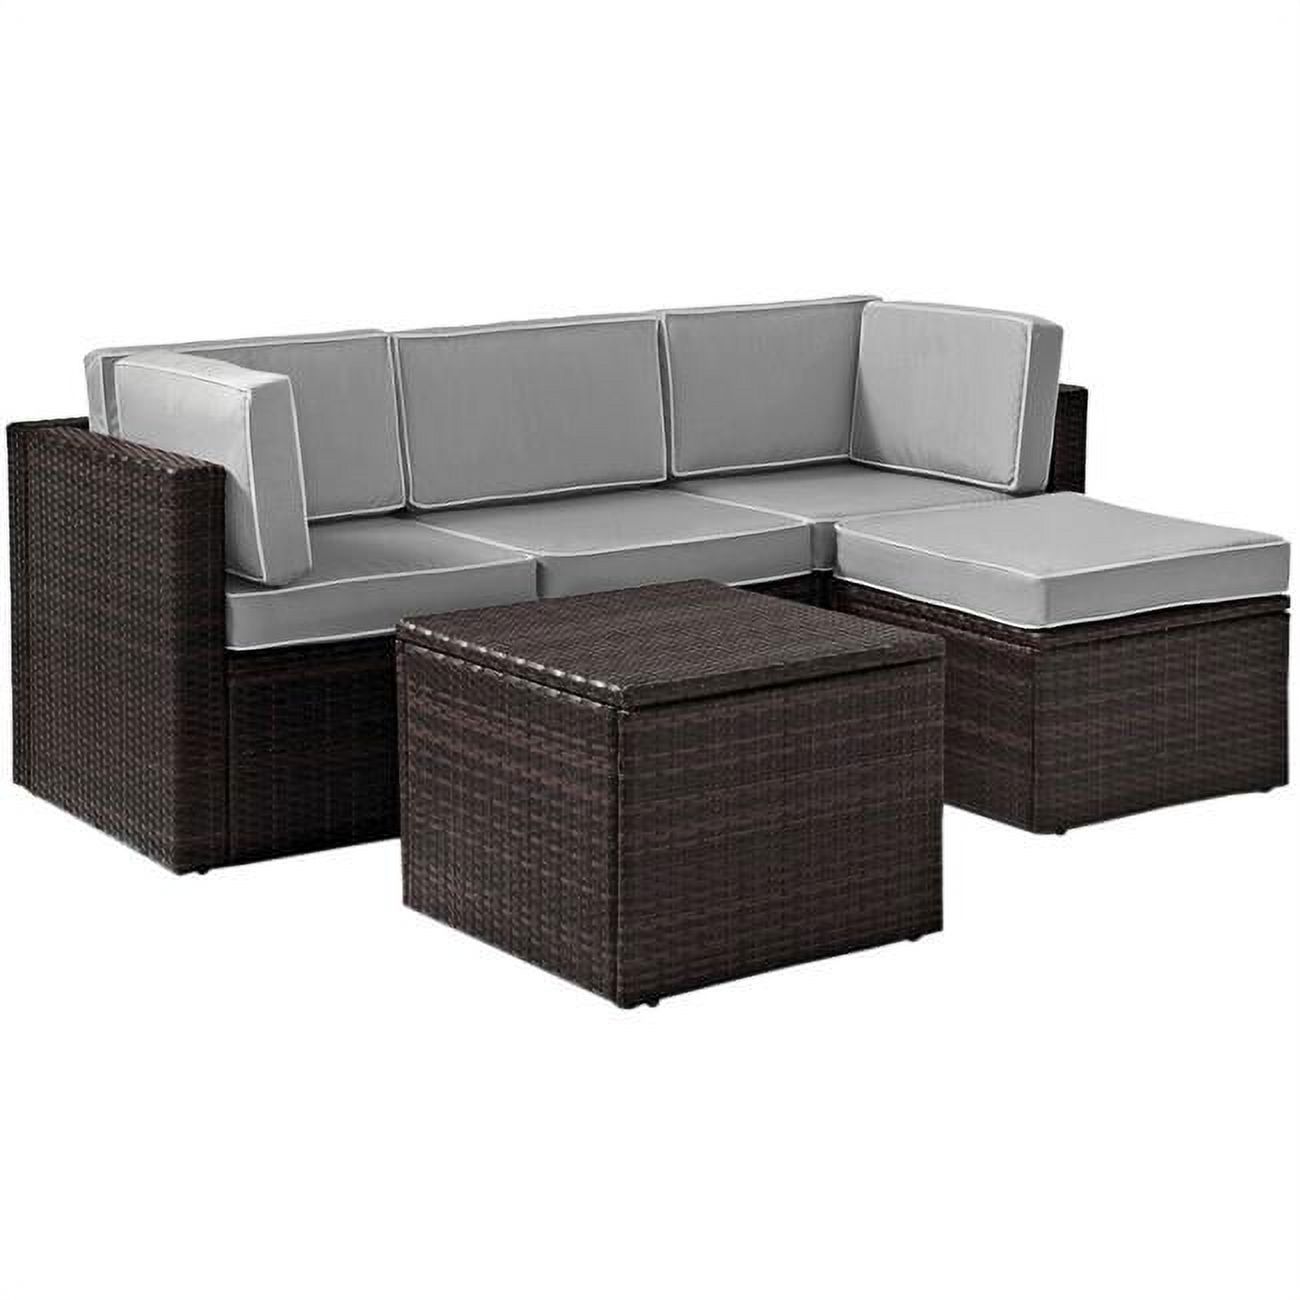 Crosley Palm Harbor 5 Piece Wicker Patio Sectional Set in Brown and Gray - image 1 of 3